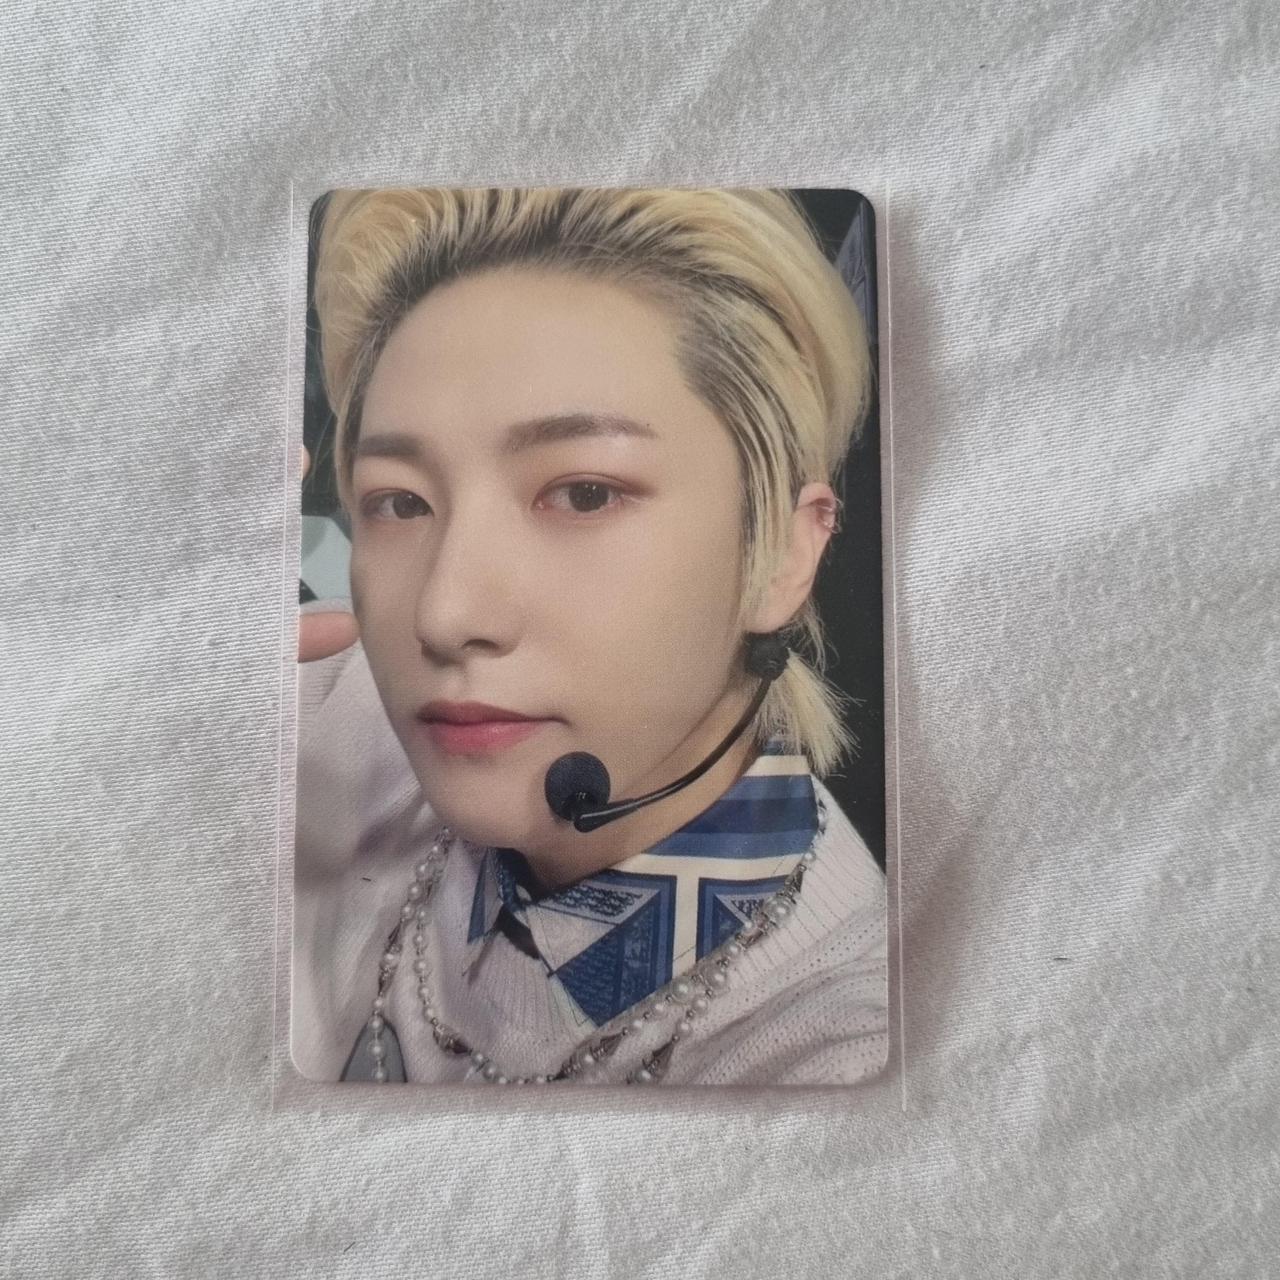 Nct dream renjun dicon photocard Instant buy is on - Depop